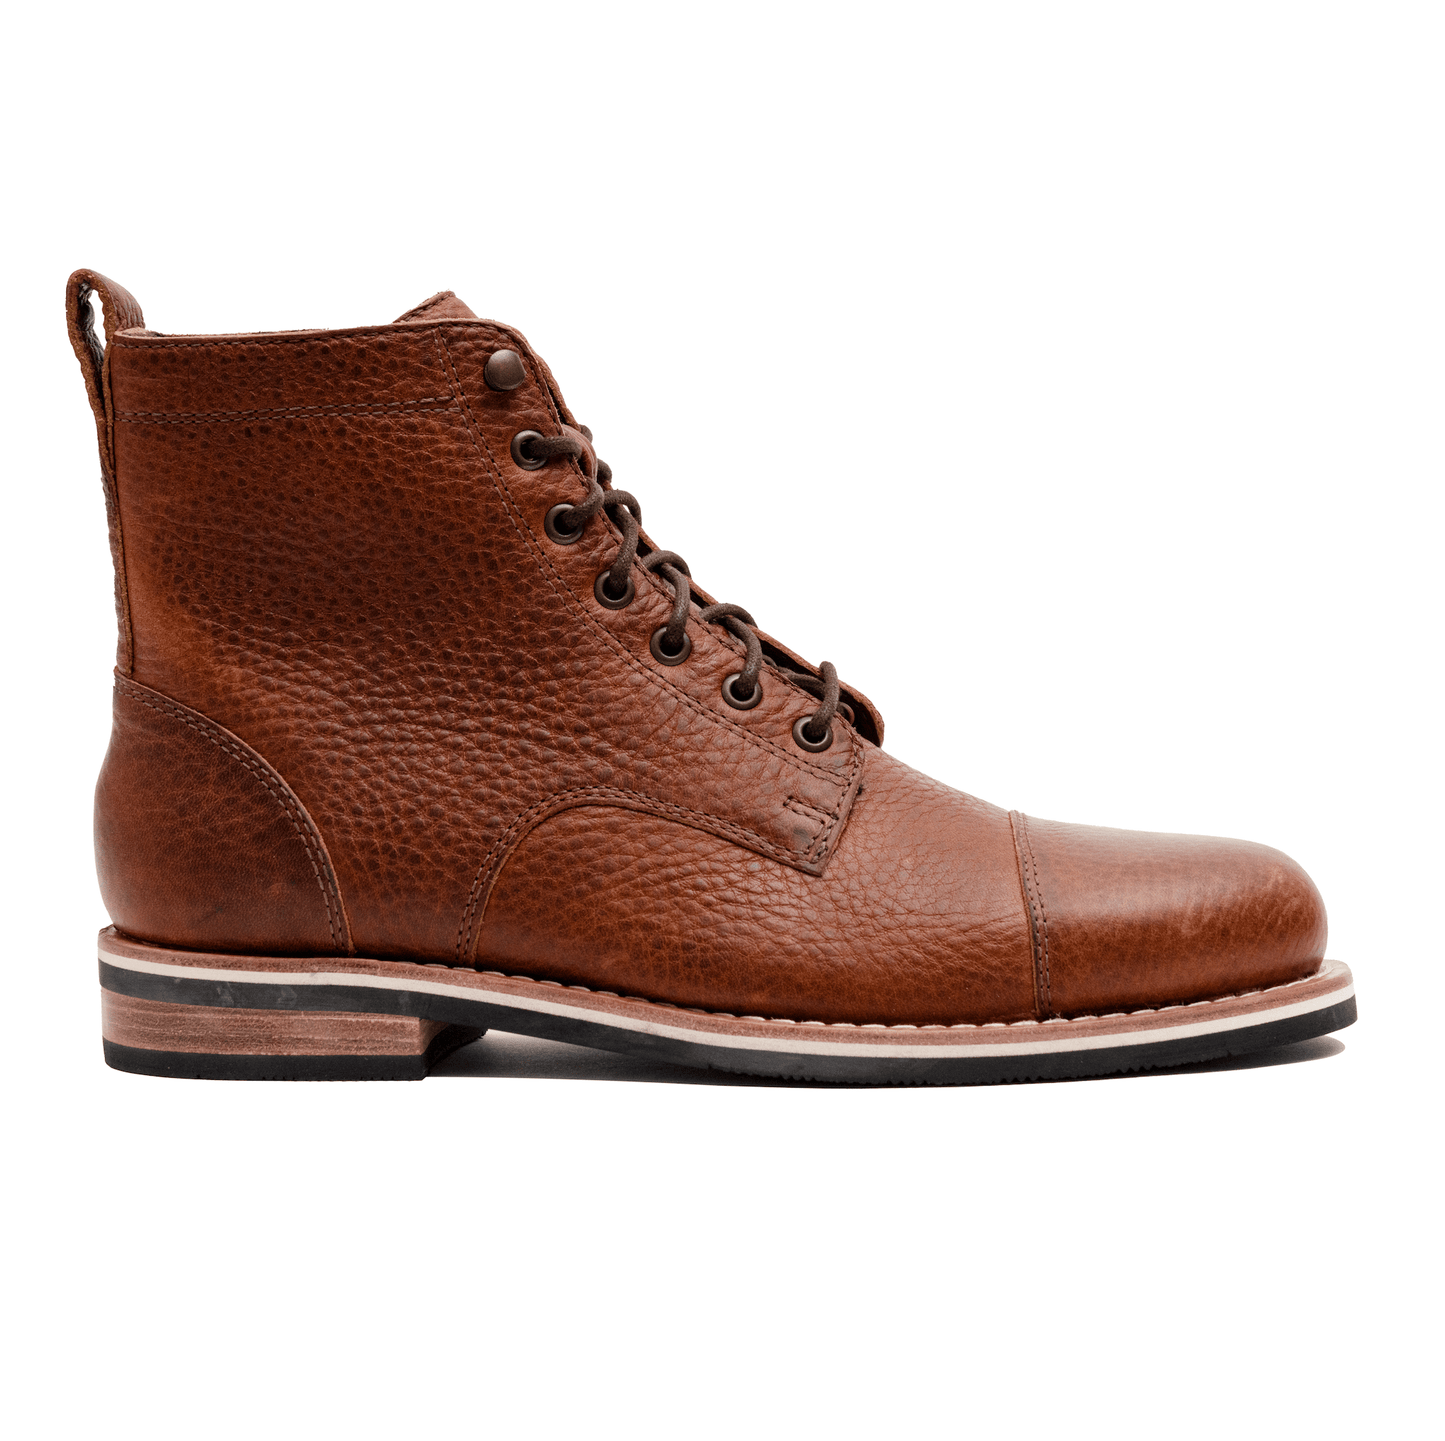 HELM Boots The Marfa Brown